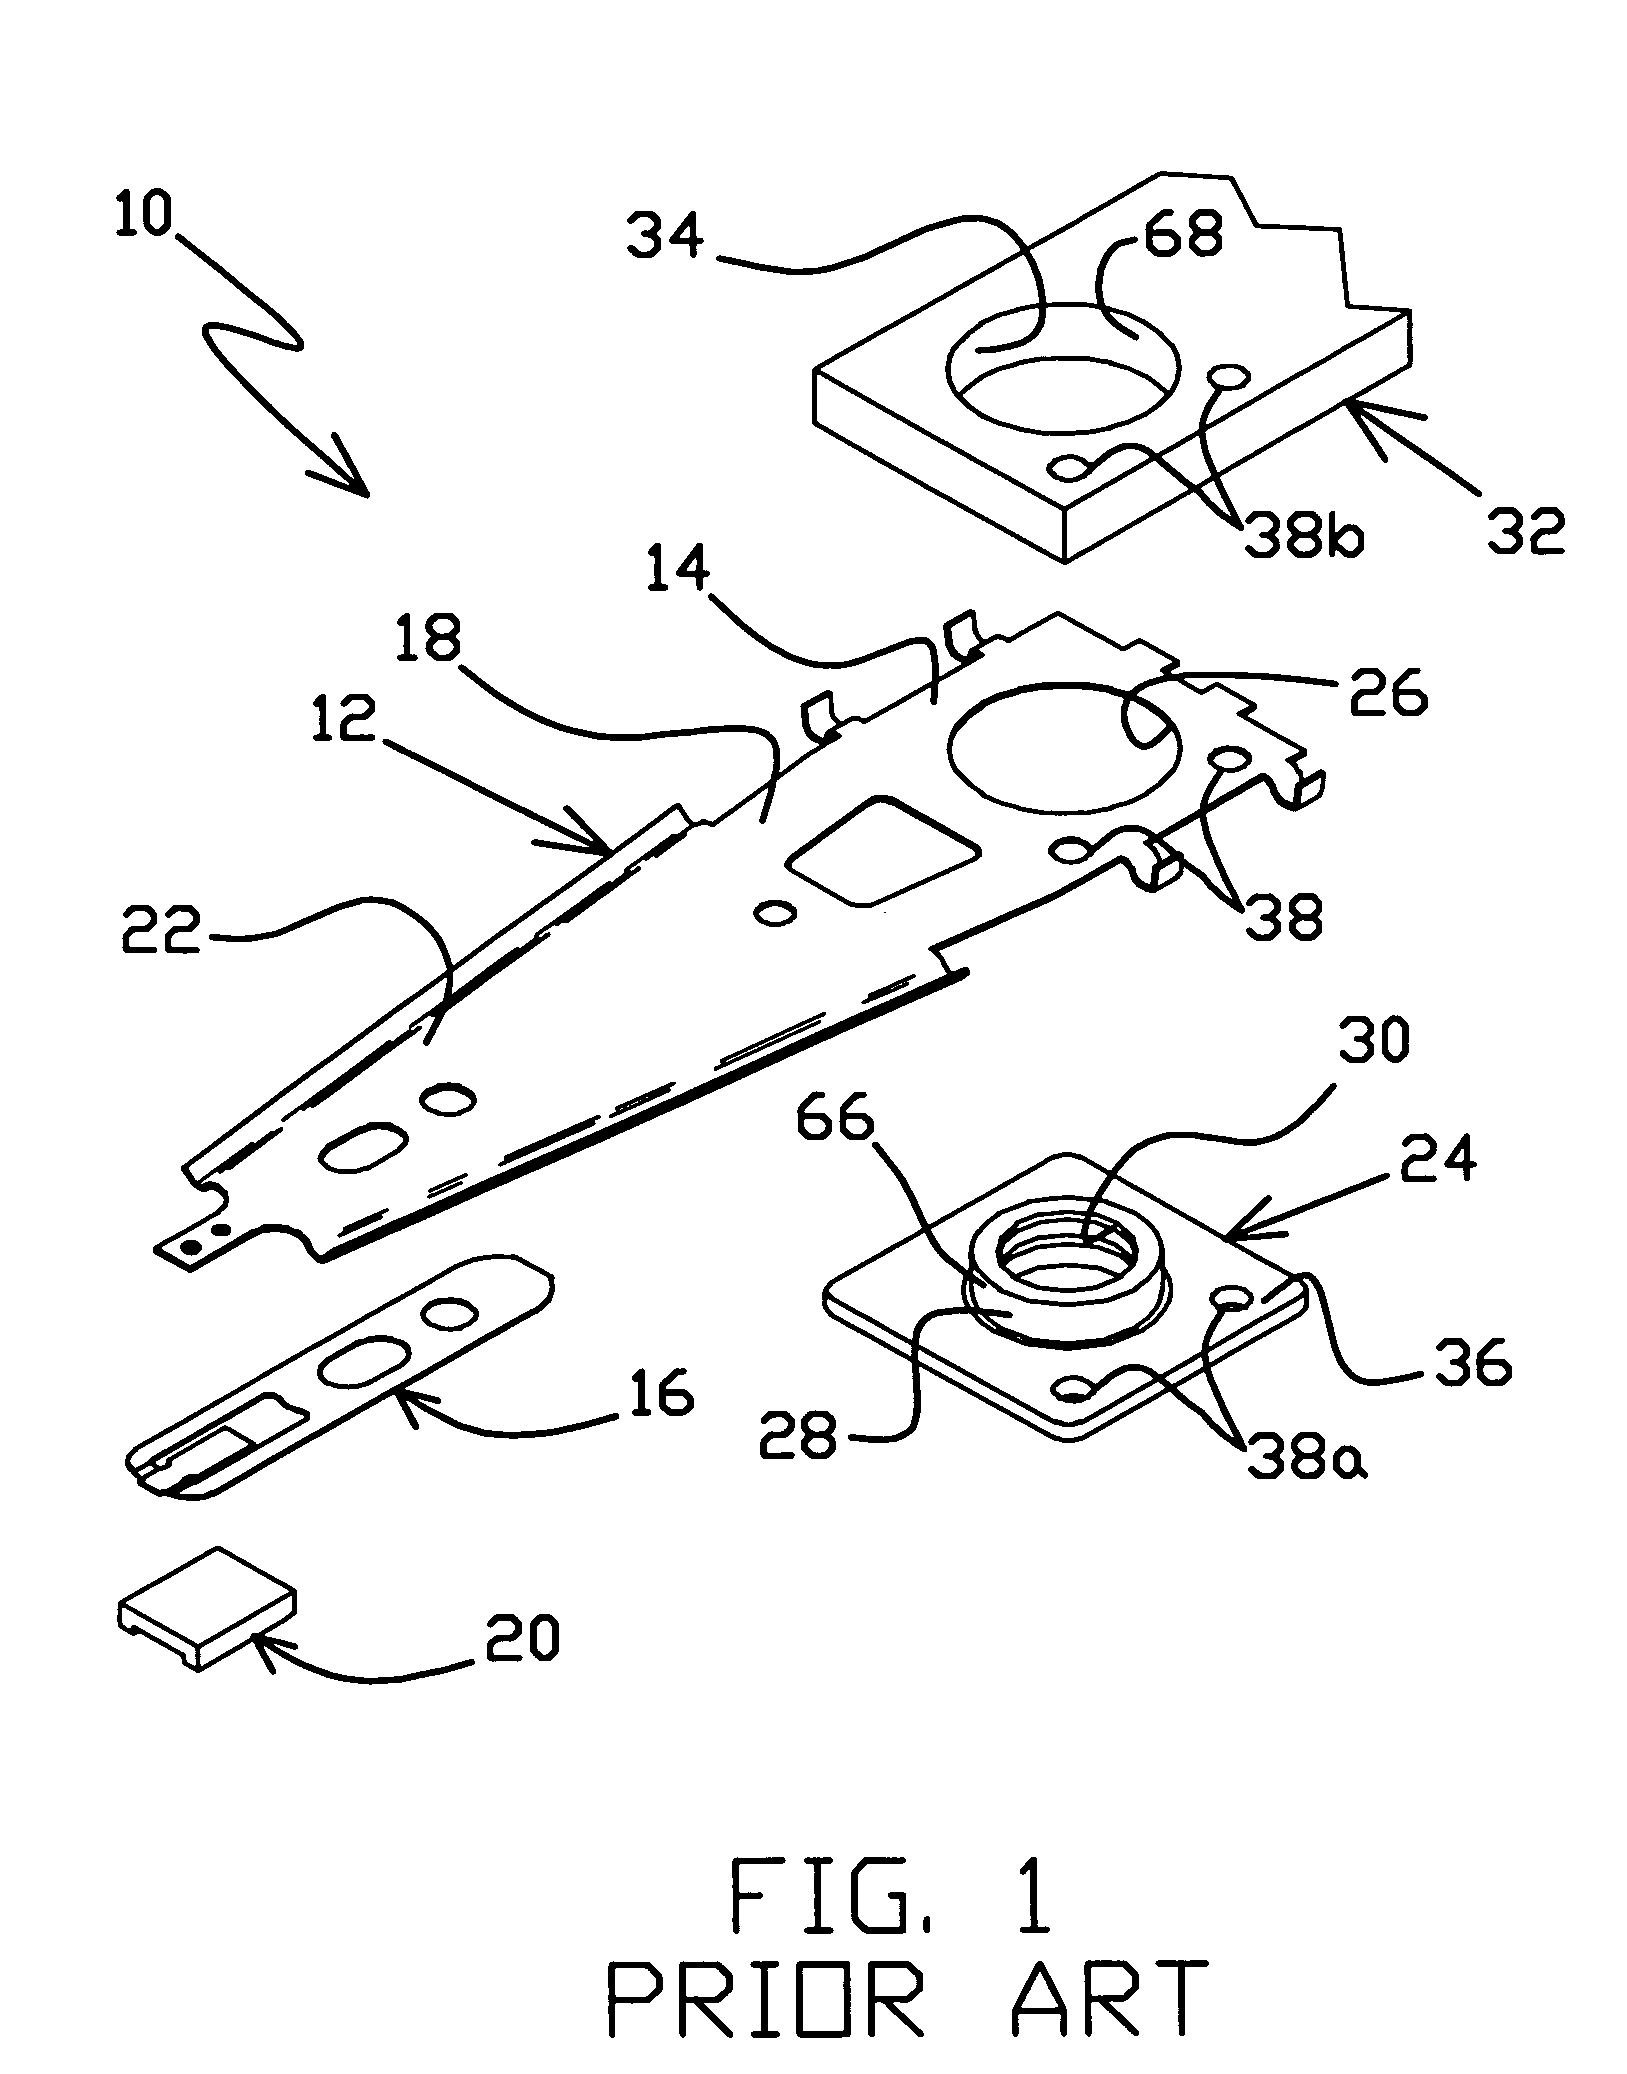 Method of forming a head suspension with an integral boss tower